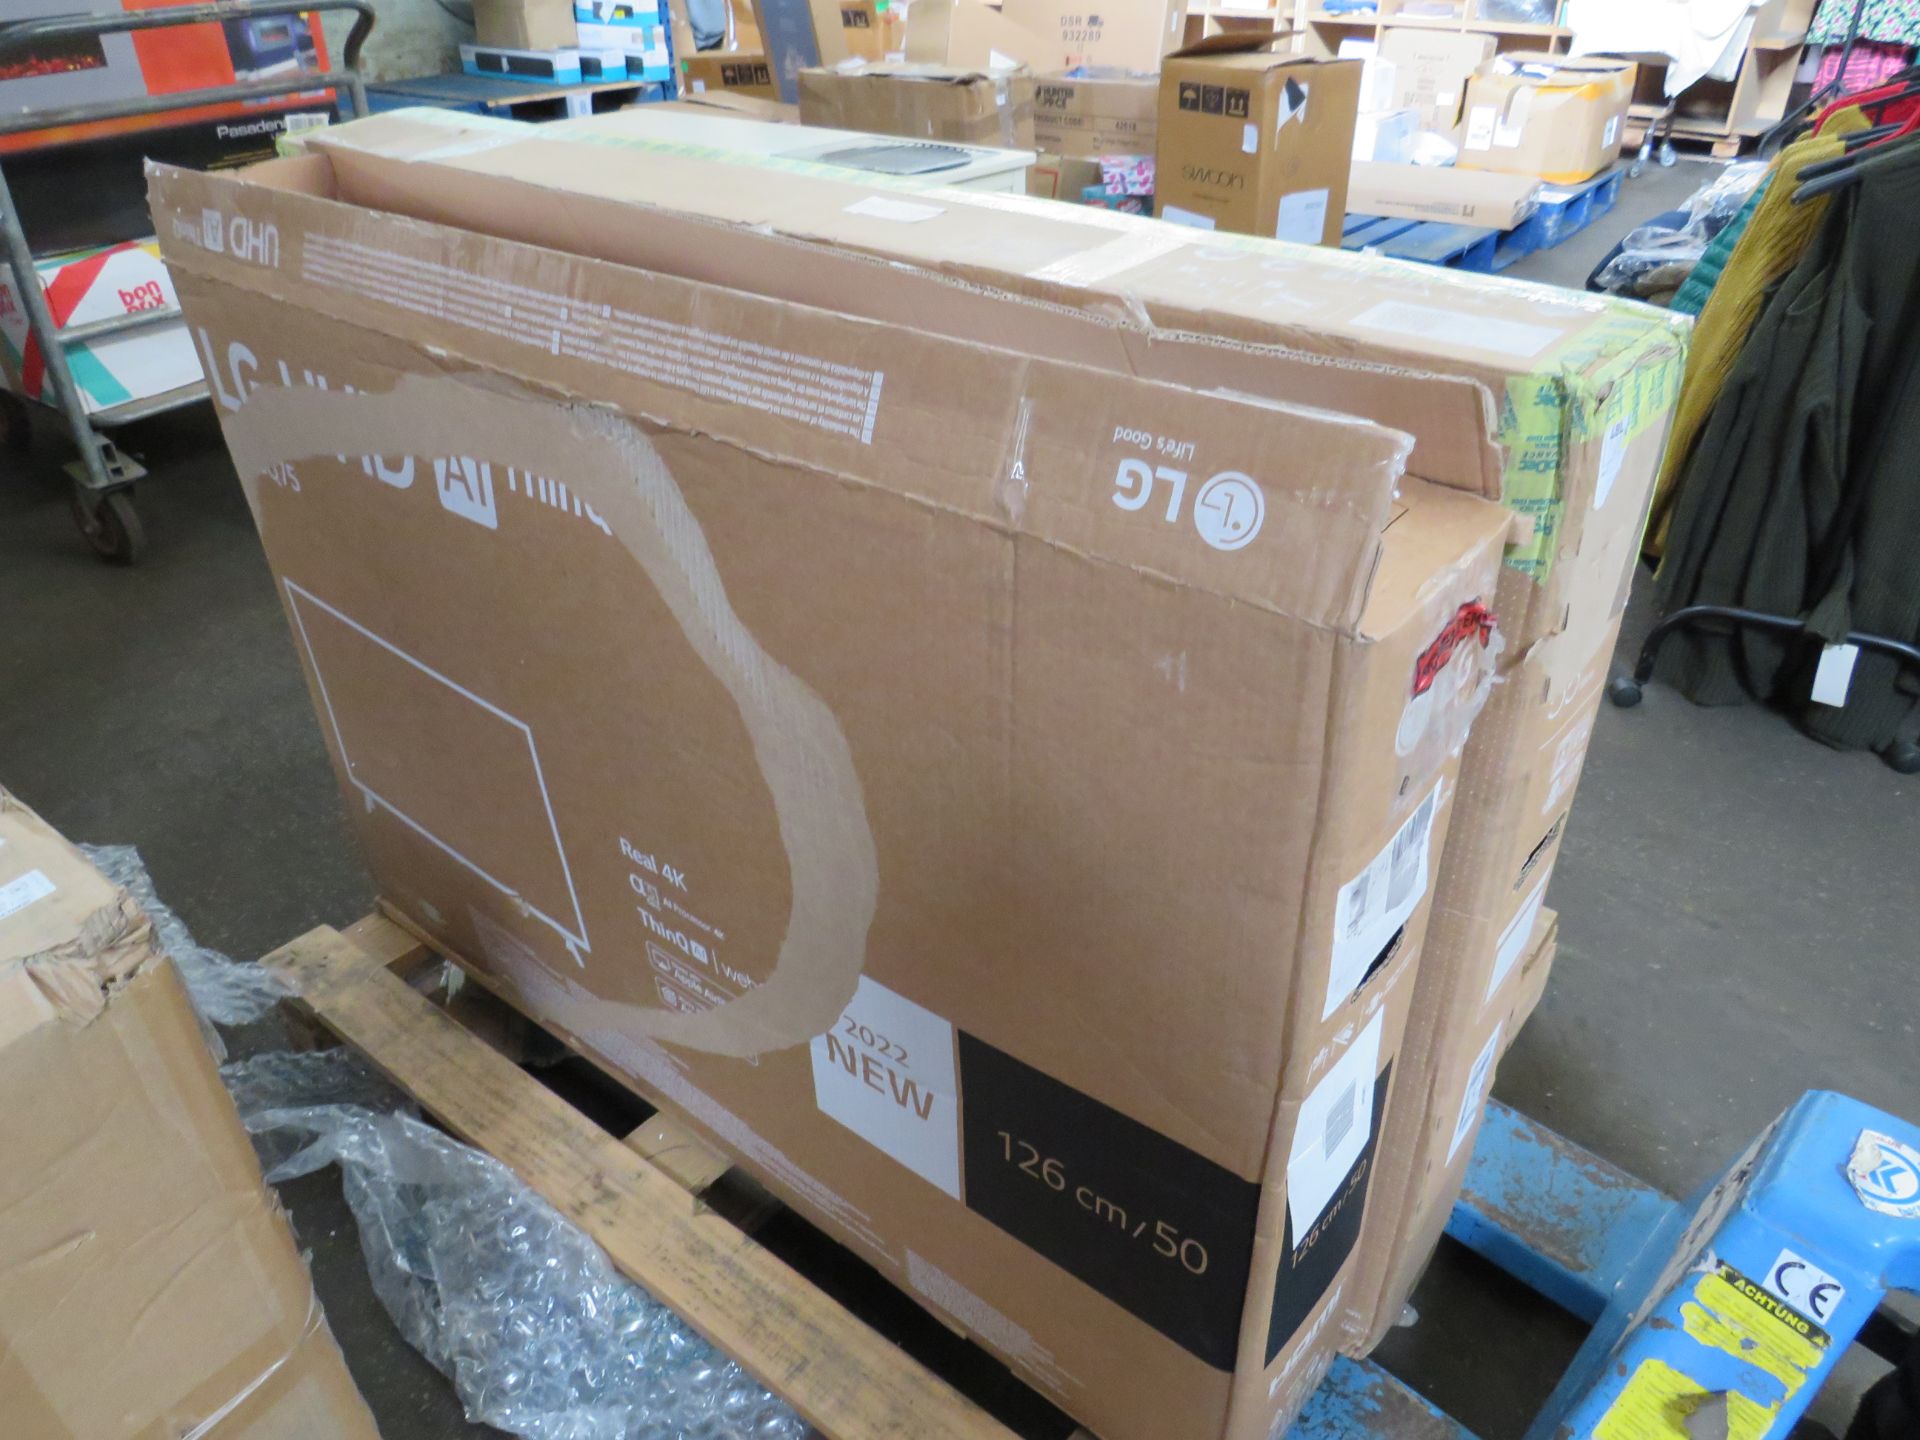 Pallet of 5x Smashed screen TV's and monitors from LG, Samsung, Lenovo and more - Image 2 of 2